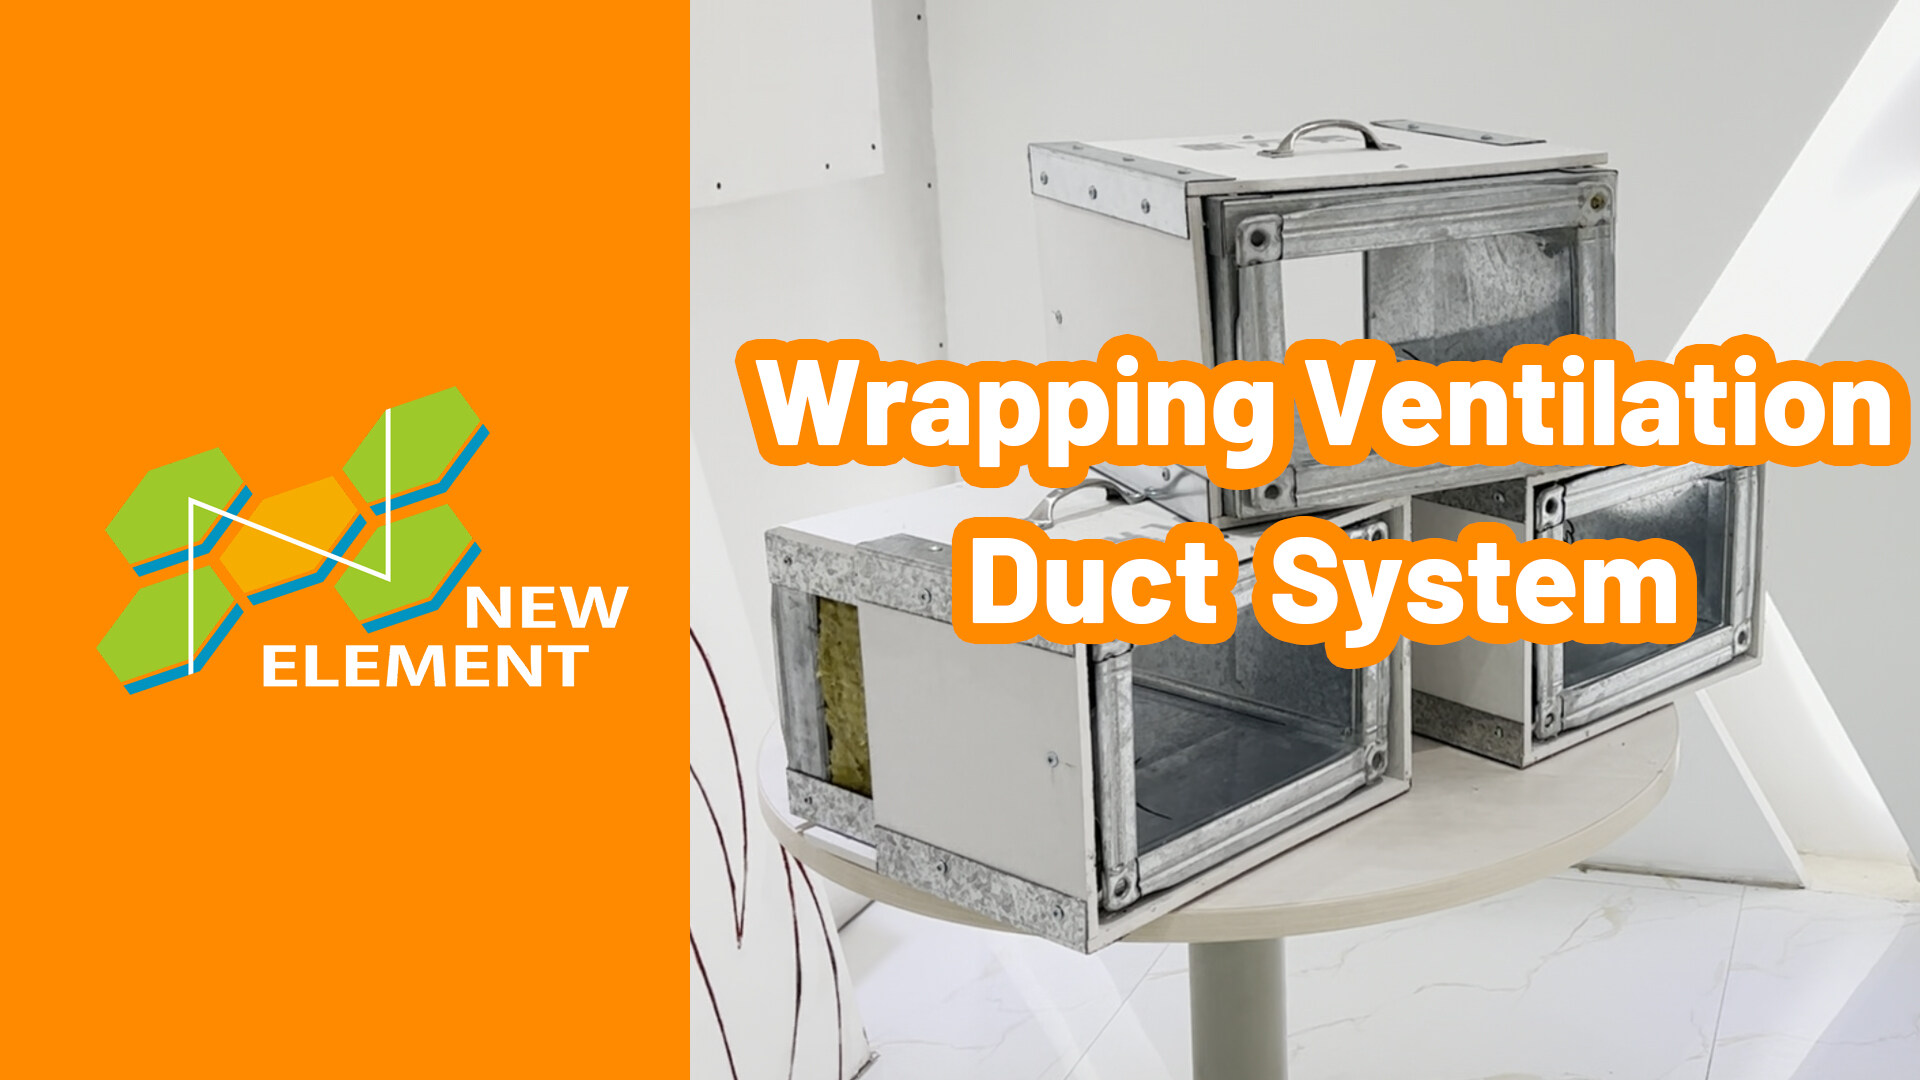 NEW ELEMENT Fire Rated Calcium SIlicate Board Ducting Wrapping system